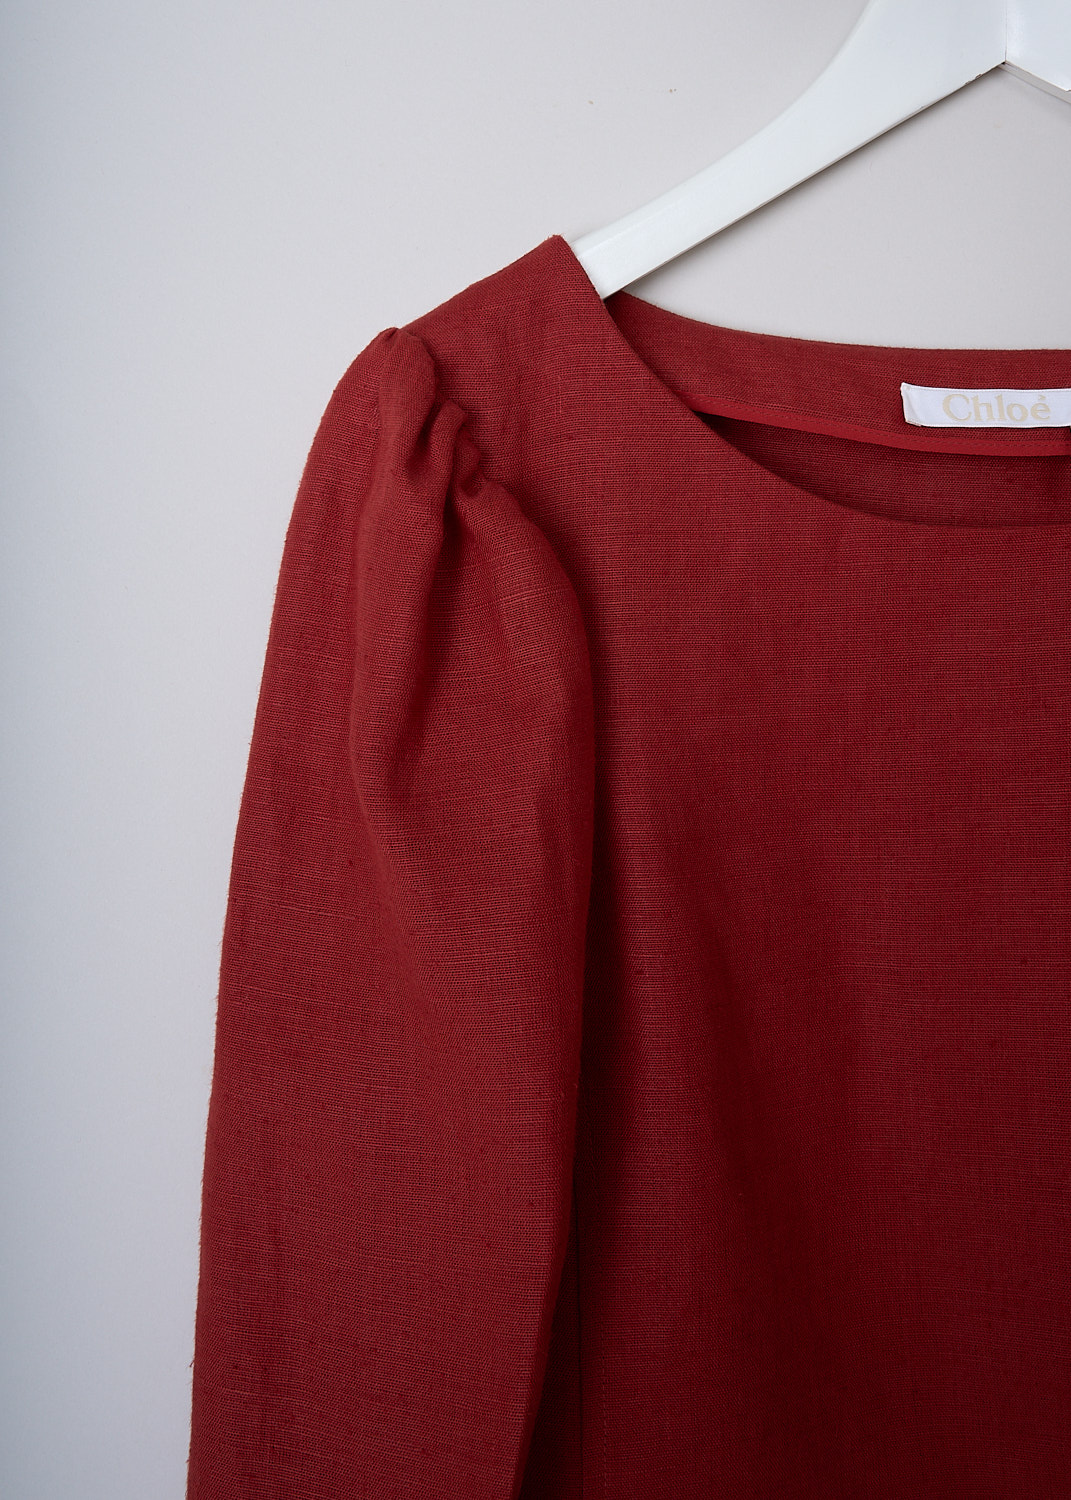 CHLOÉ, CROPPED LINEN TOP IN PEPPERY RED, CHC23UHT13030649_PEPPERY_RED, Red, Detail, This Peppery Red linen top has a boat neckline. The long puff sleeves have straight ends. The top has a cropped length and a straight hemline. 
